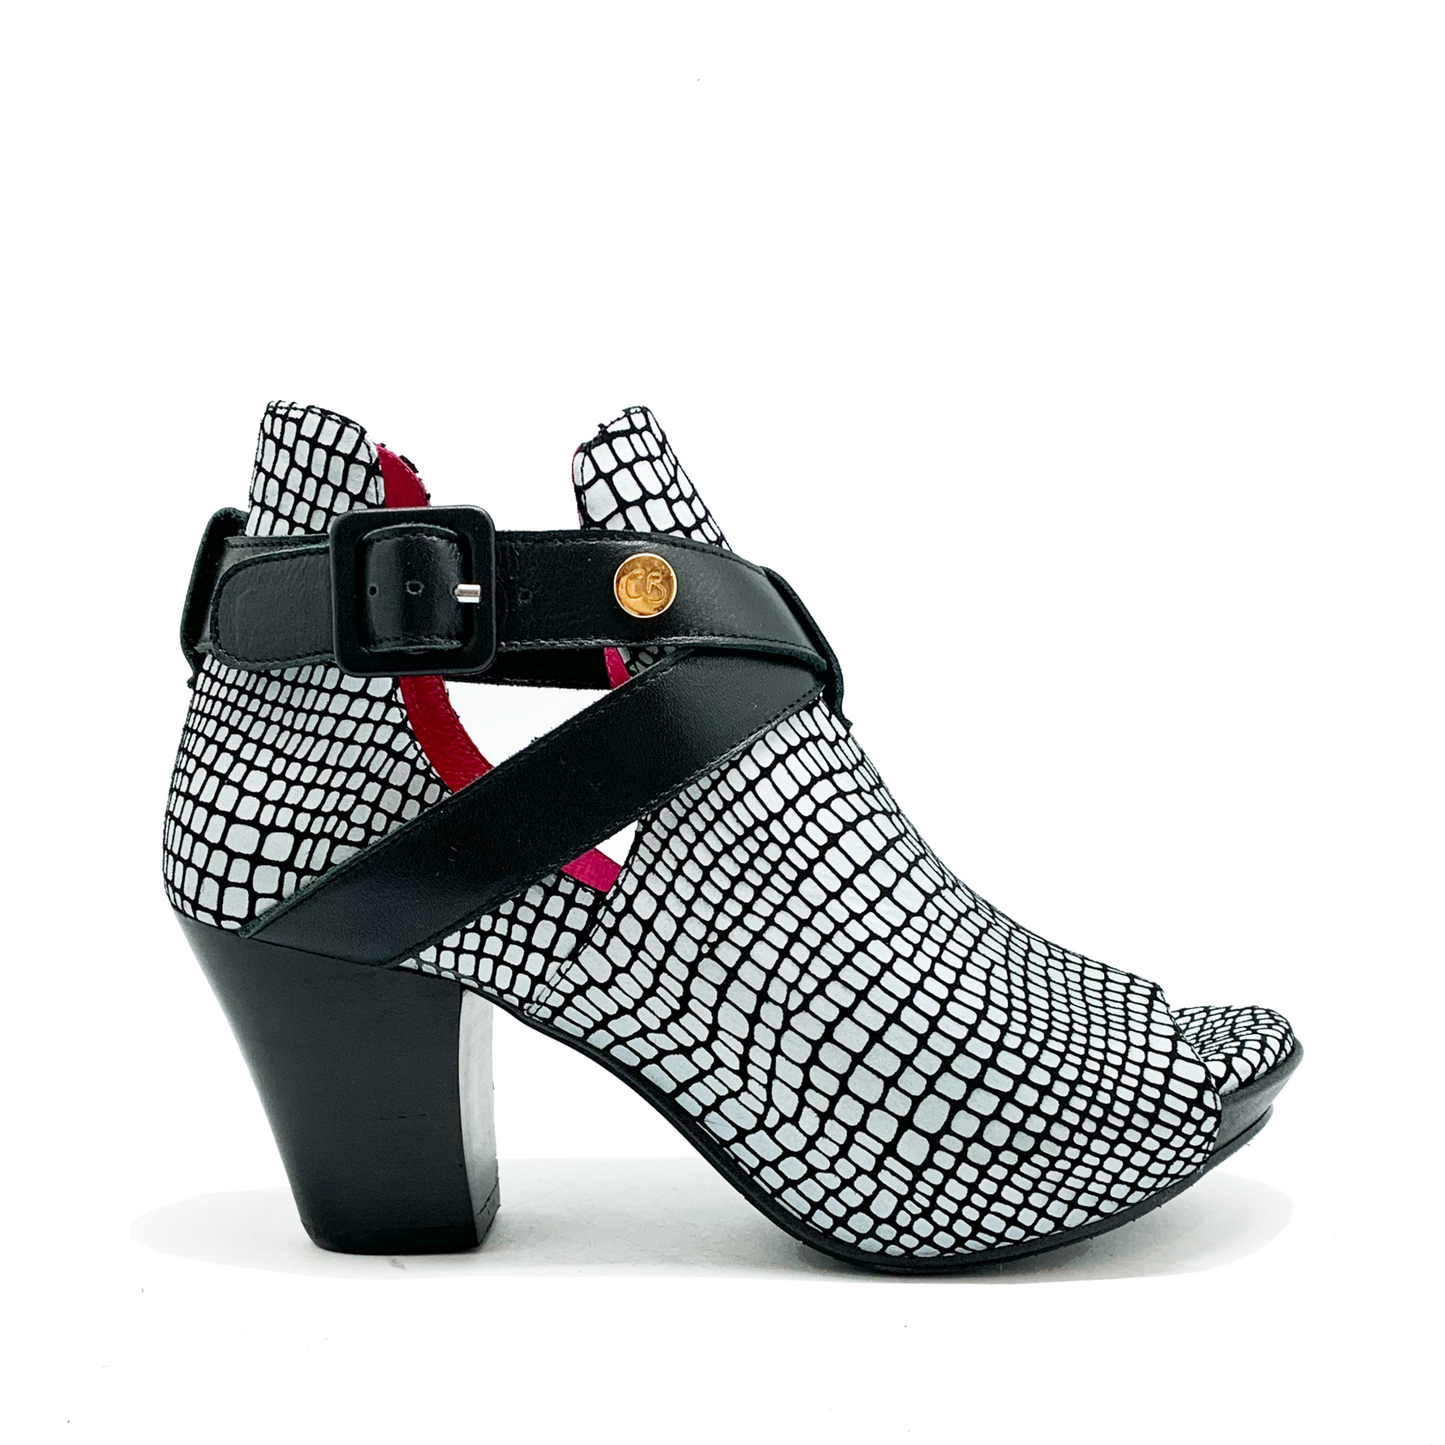 Rouge - Black and White shoe boot